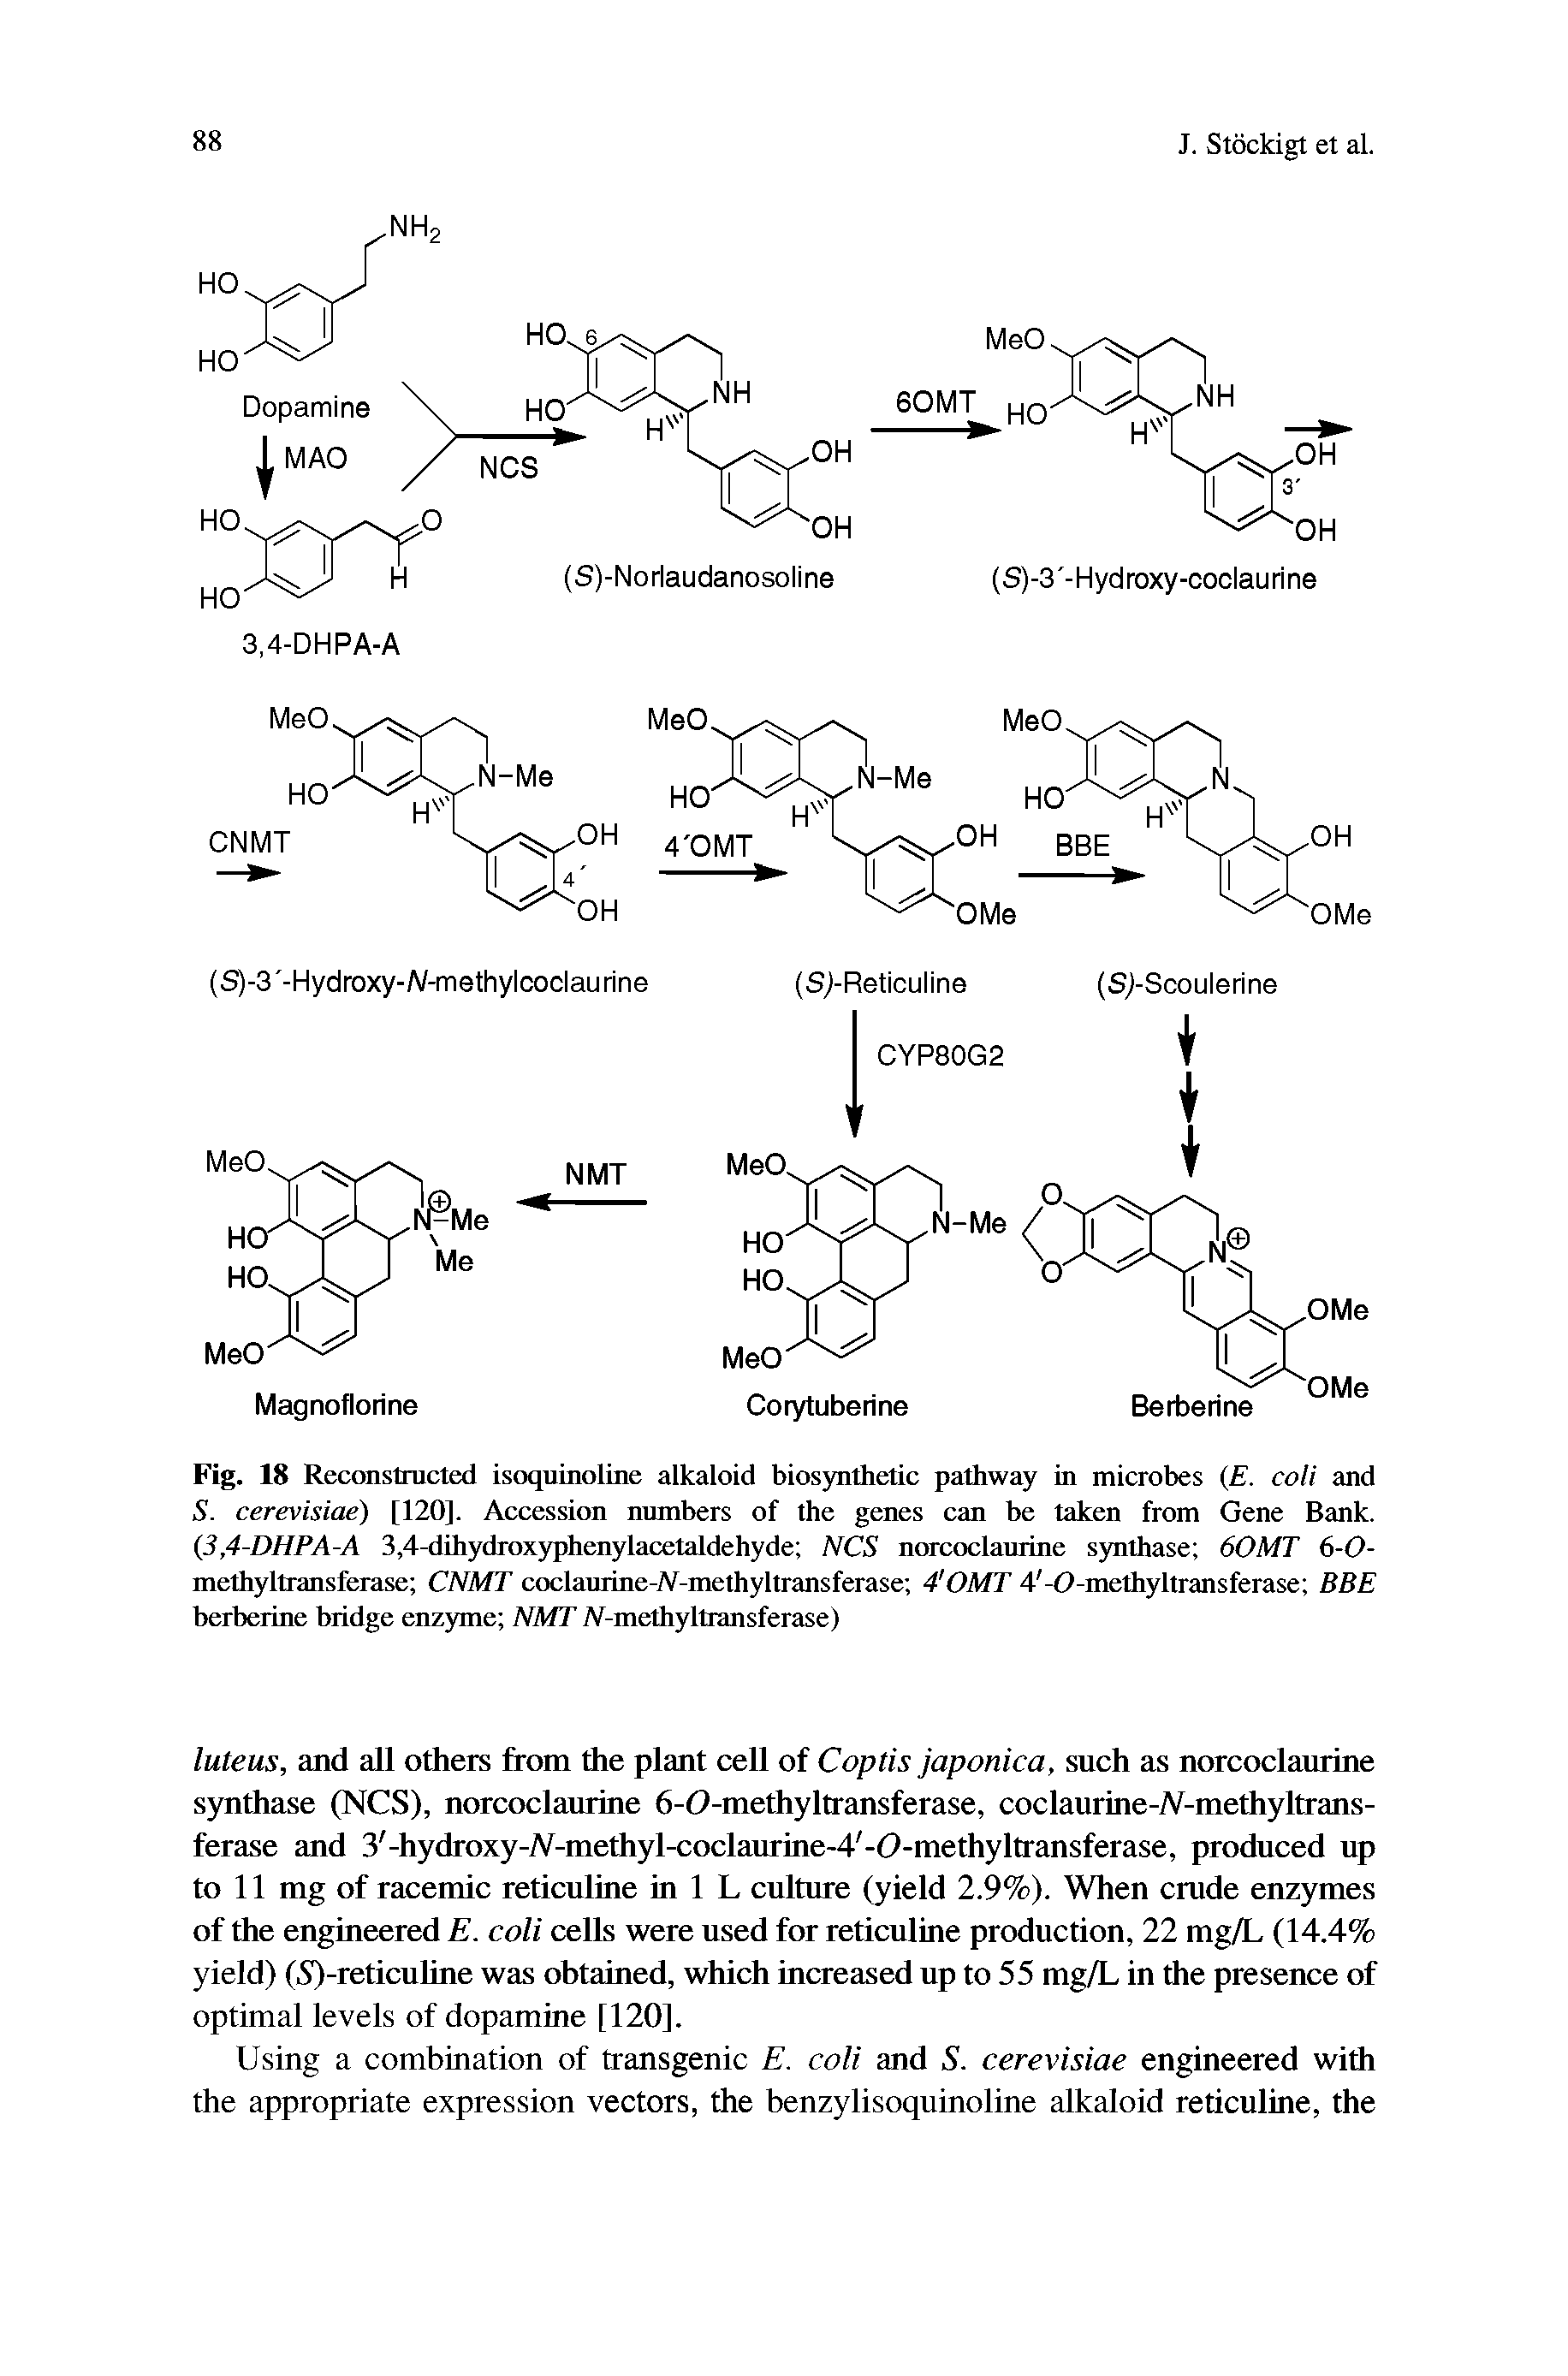 Fig. 18 Reconstructed isoquinoline alkaloid biosynthetic pathway in microbes (E. coli and S. cerevisiae) [120]. Accession numbers of the genes can be taken from Gene Bank. C3,4-DHPA-A 3,4-dihydroxyphenylacetaldehyde NCS norcoclaurine synthase 60MT 6-0-methyltransferase CNMT coclaurine-/V-mcthyltransferase 4 OMT 4 -0-methyltransferase BBE berberine bridge enzyme NMT /V-methyltransferase)...